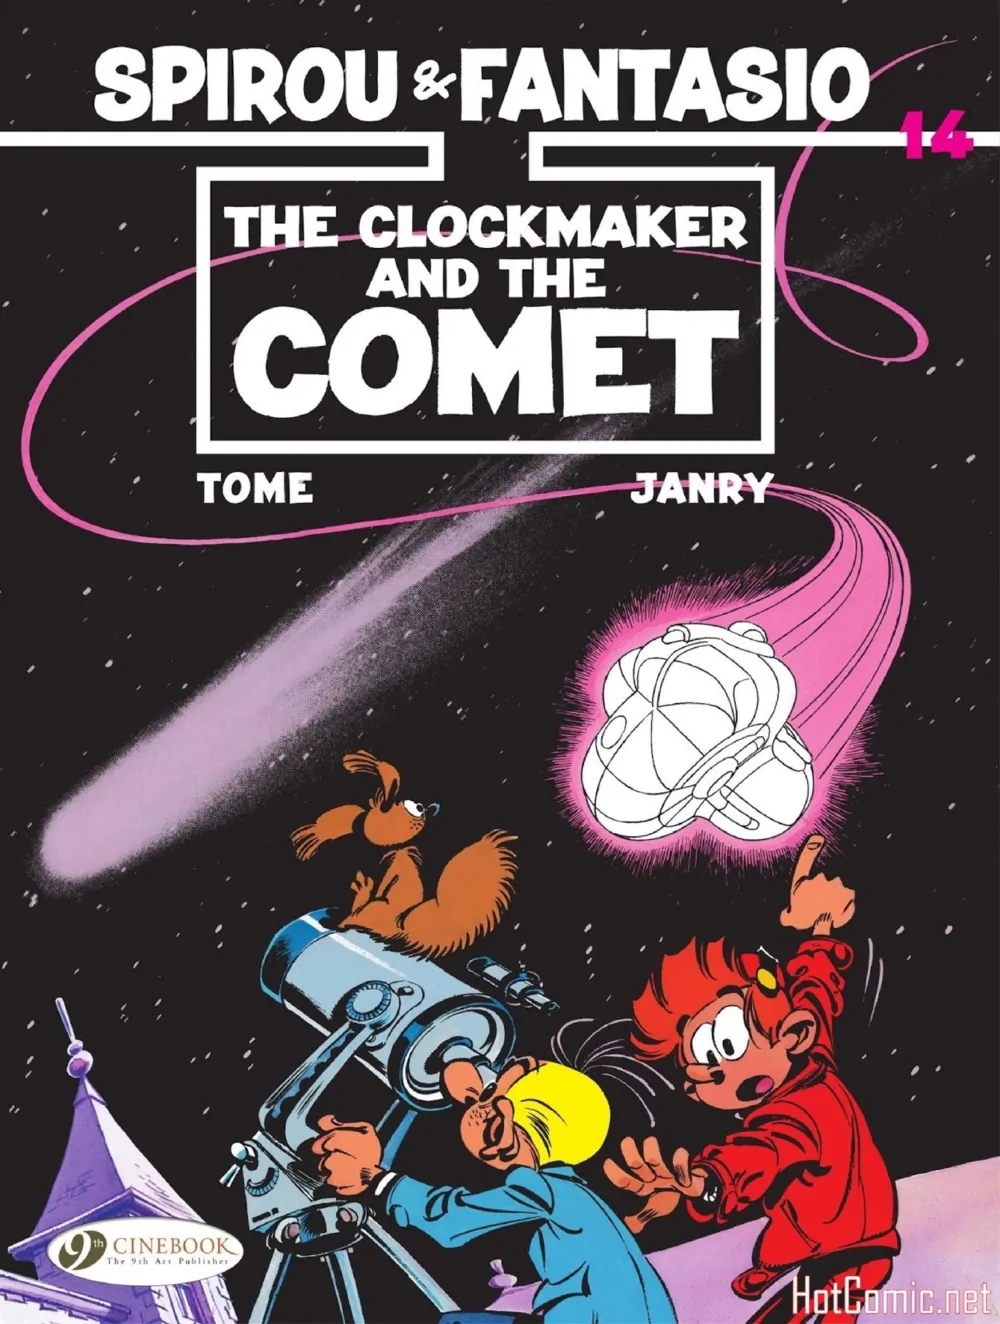 The Clockmaker and the Comet